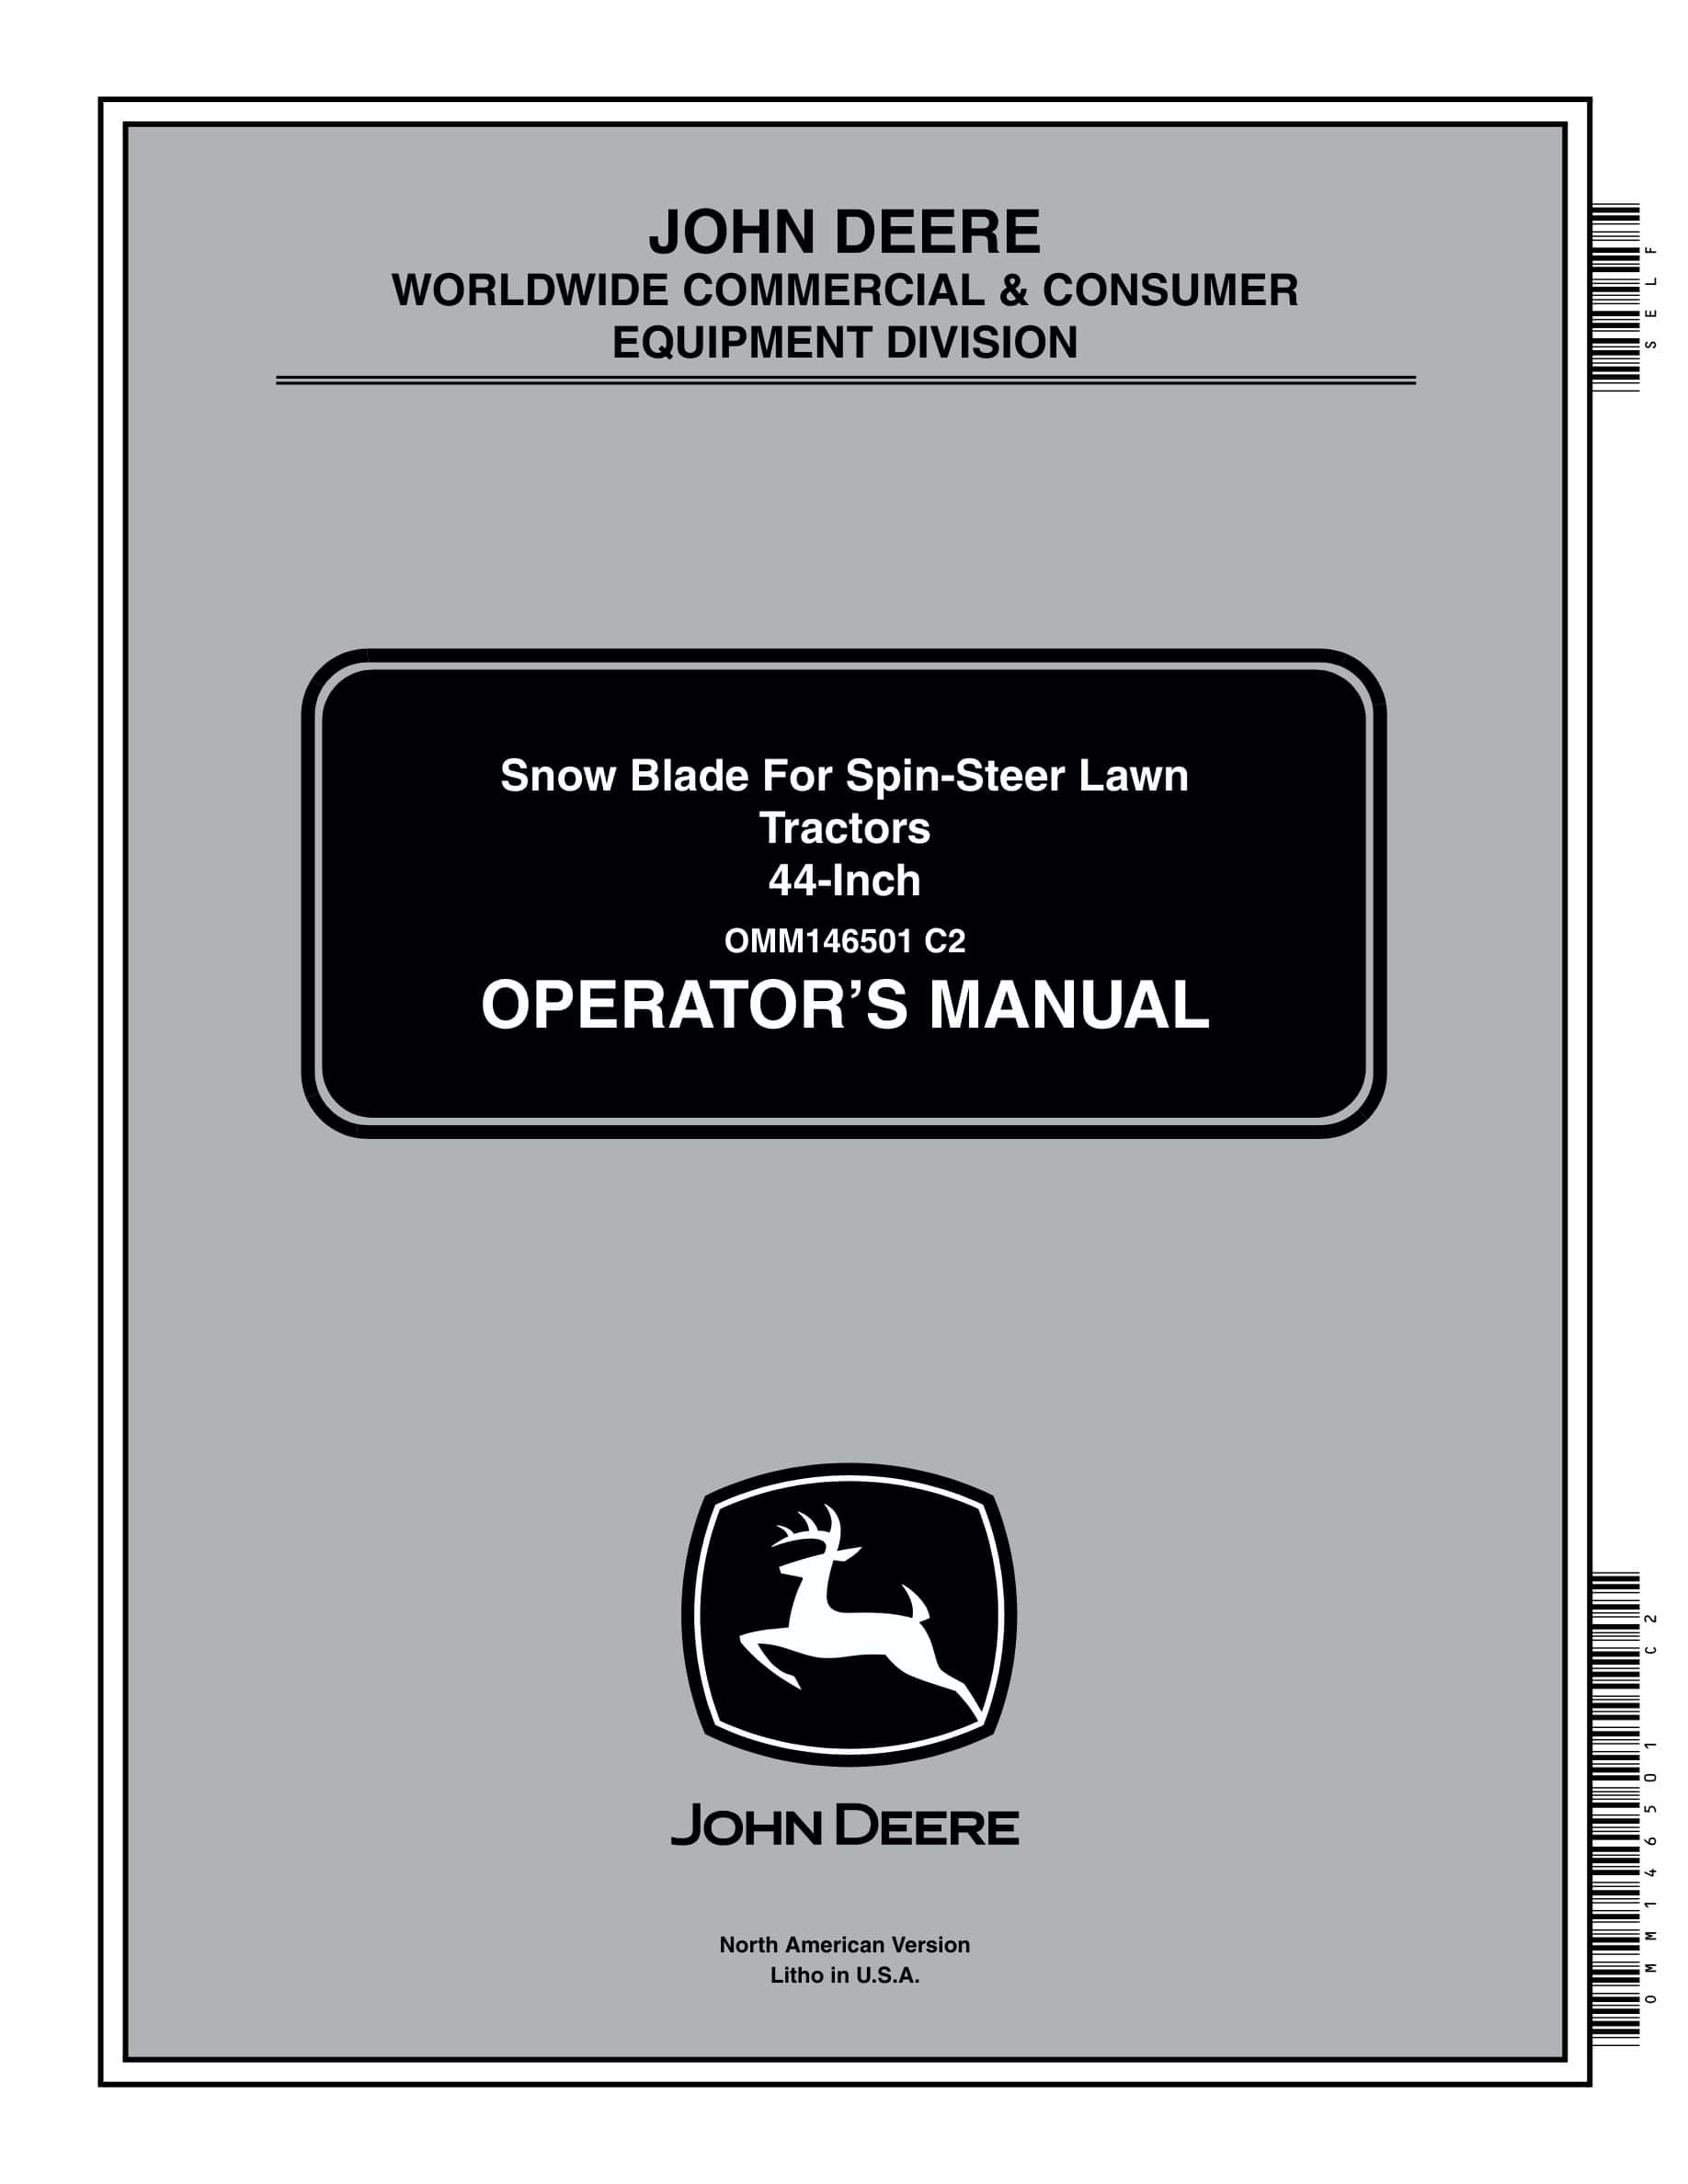 John Deere Snow Blade For Spin-steer 44-inch Lawn Tractors Operator Manuals OMM146501-1